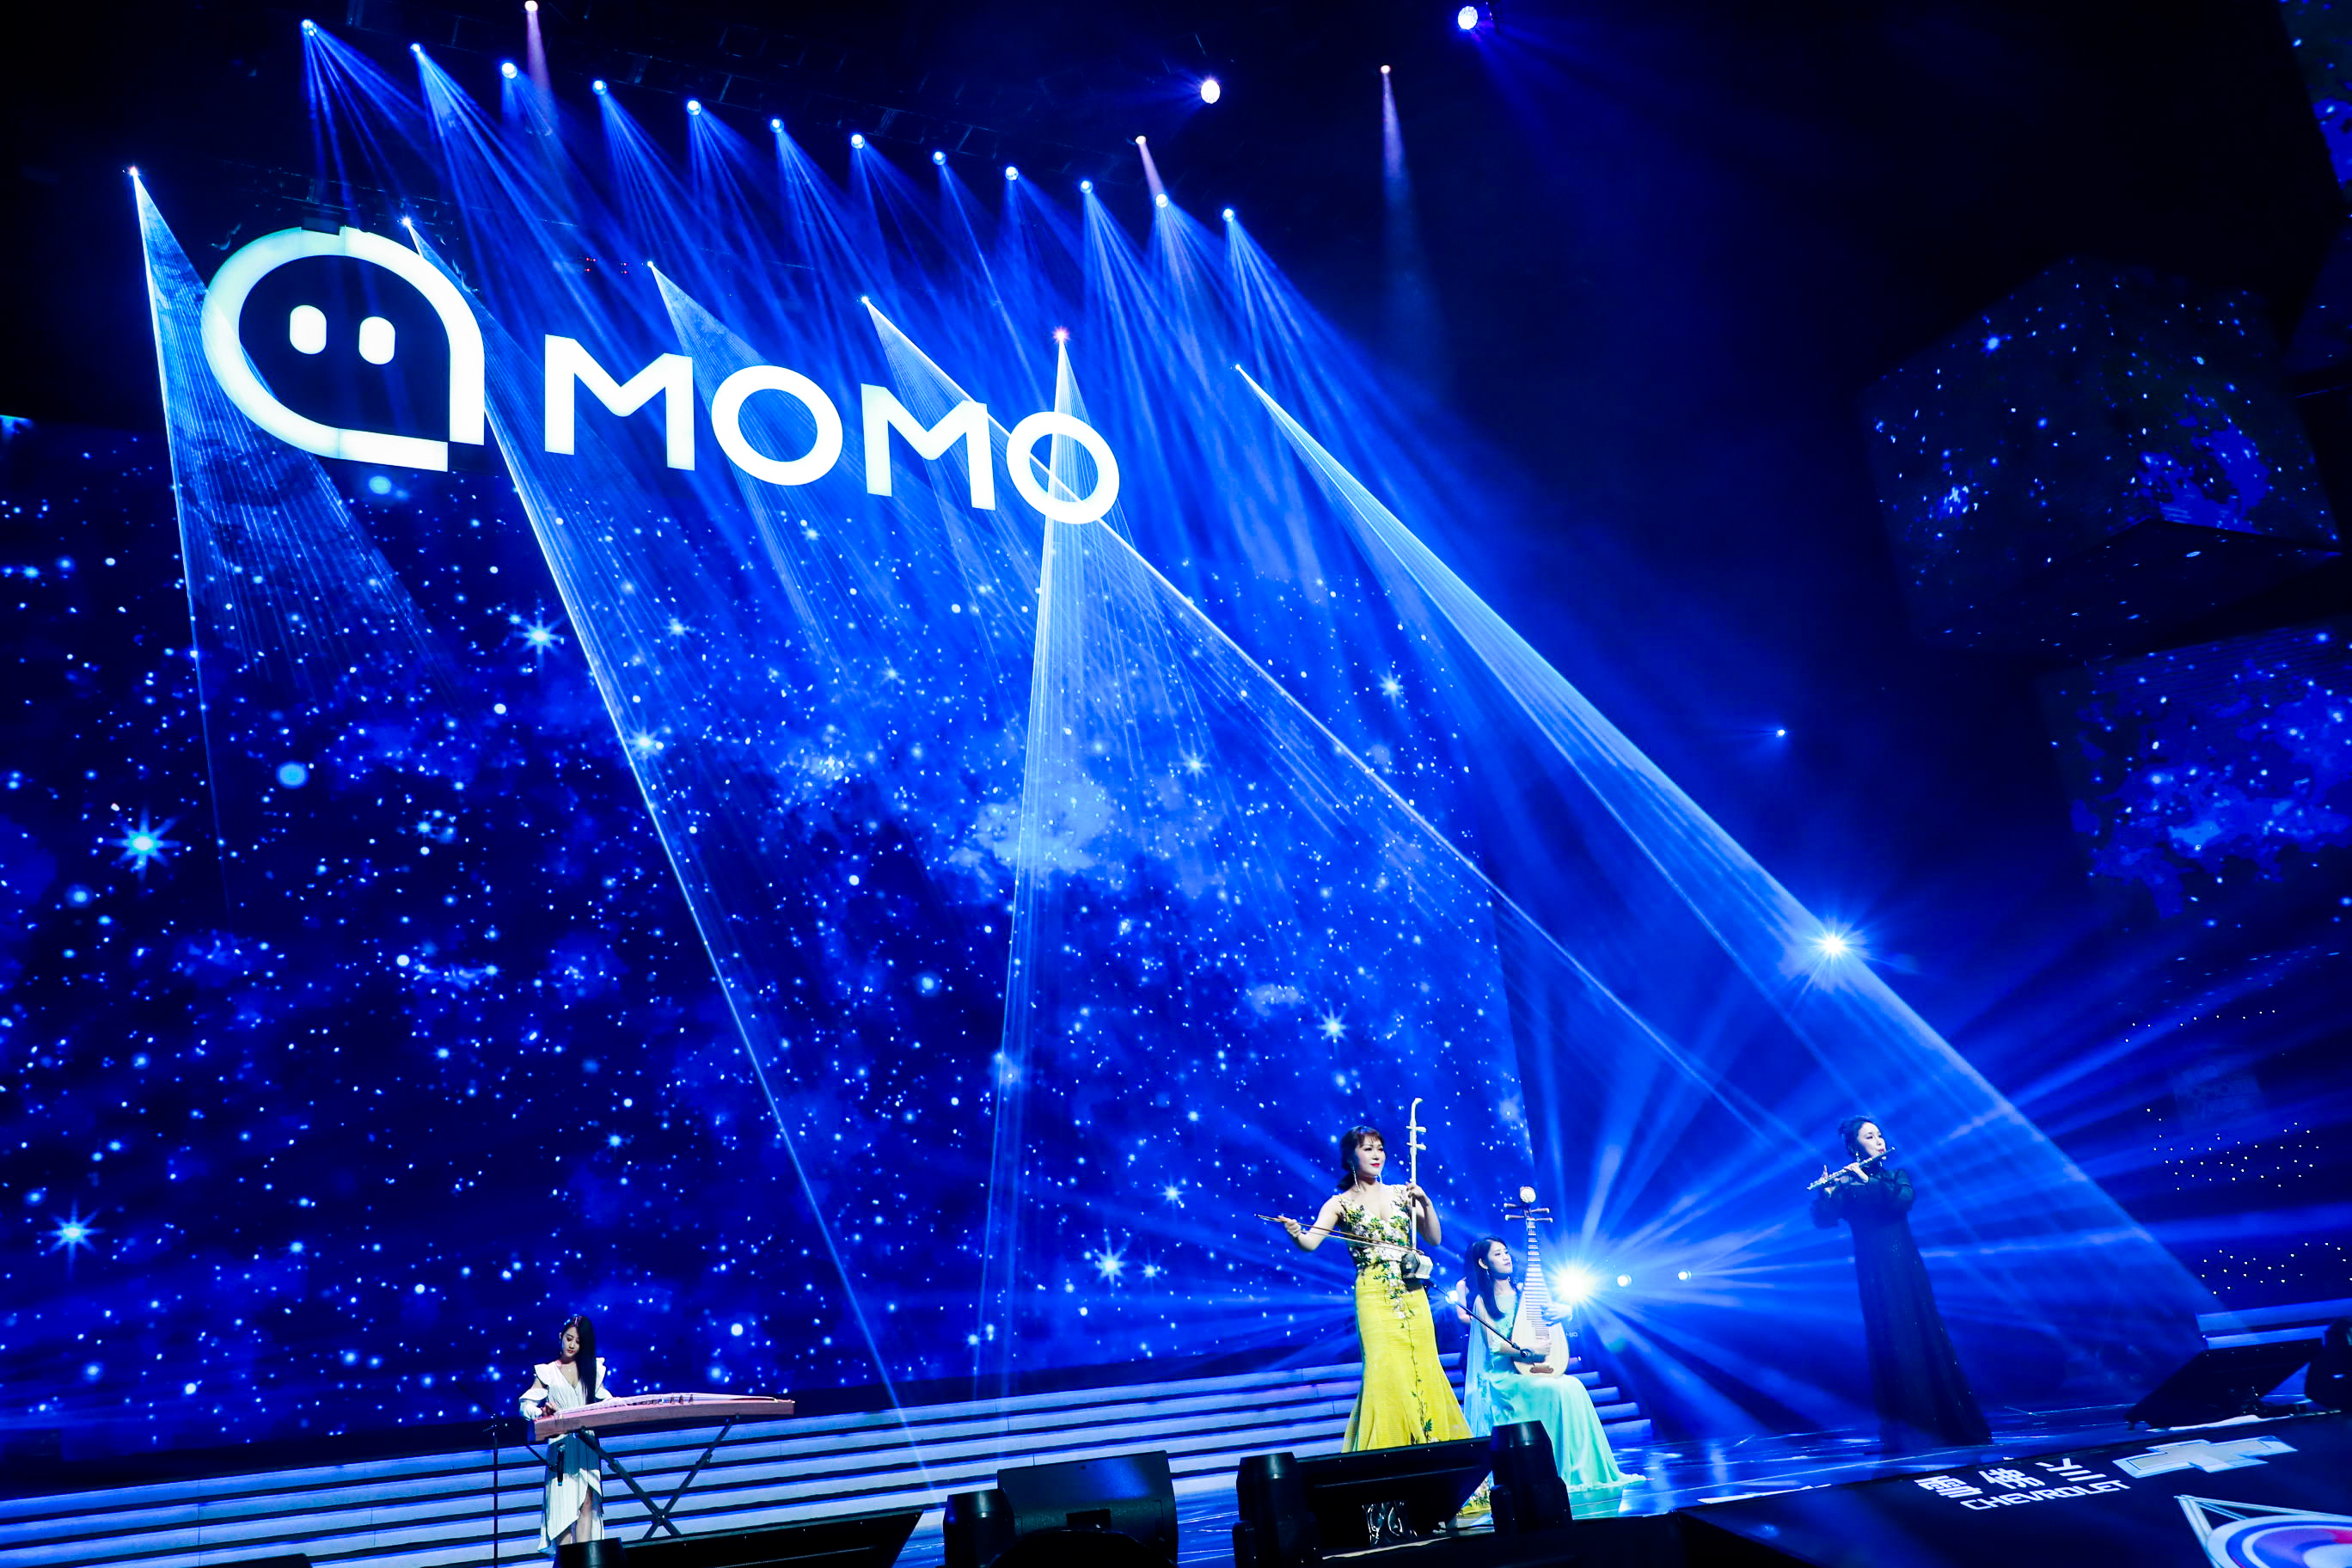 World’s fastest-growing company Momo reports a drop in net profit in Q2